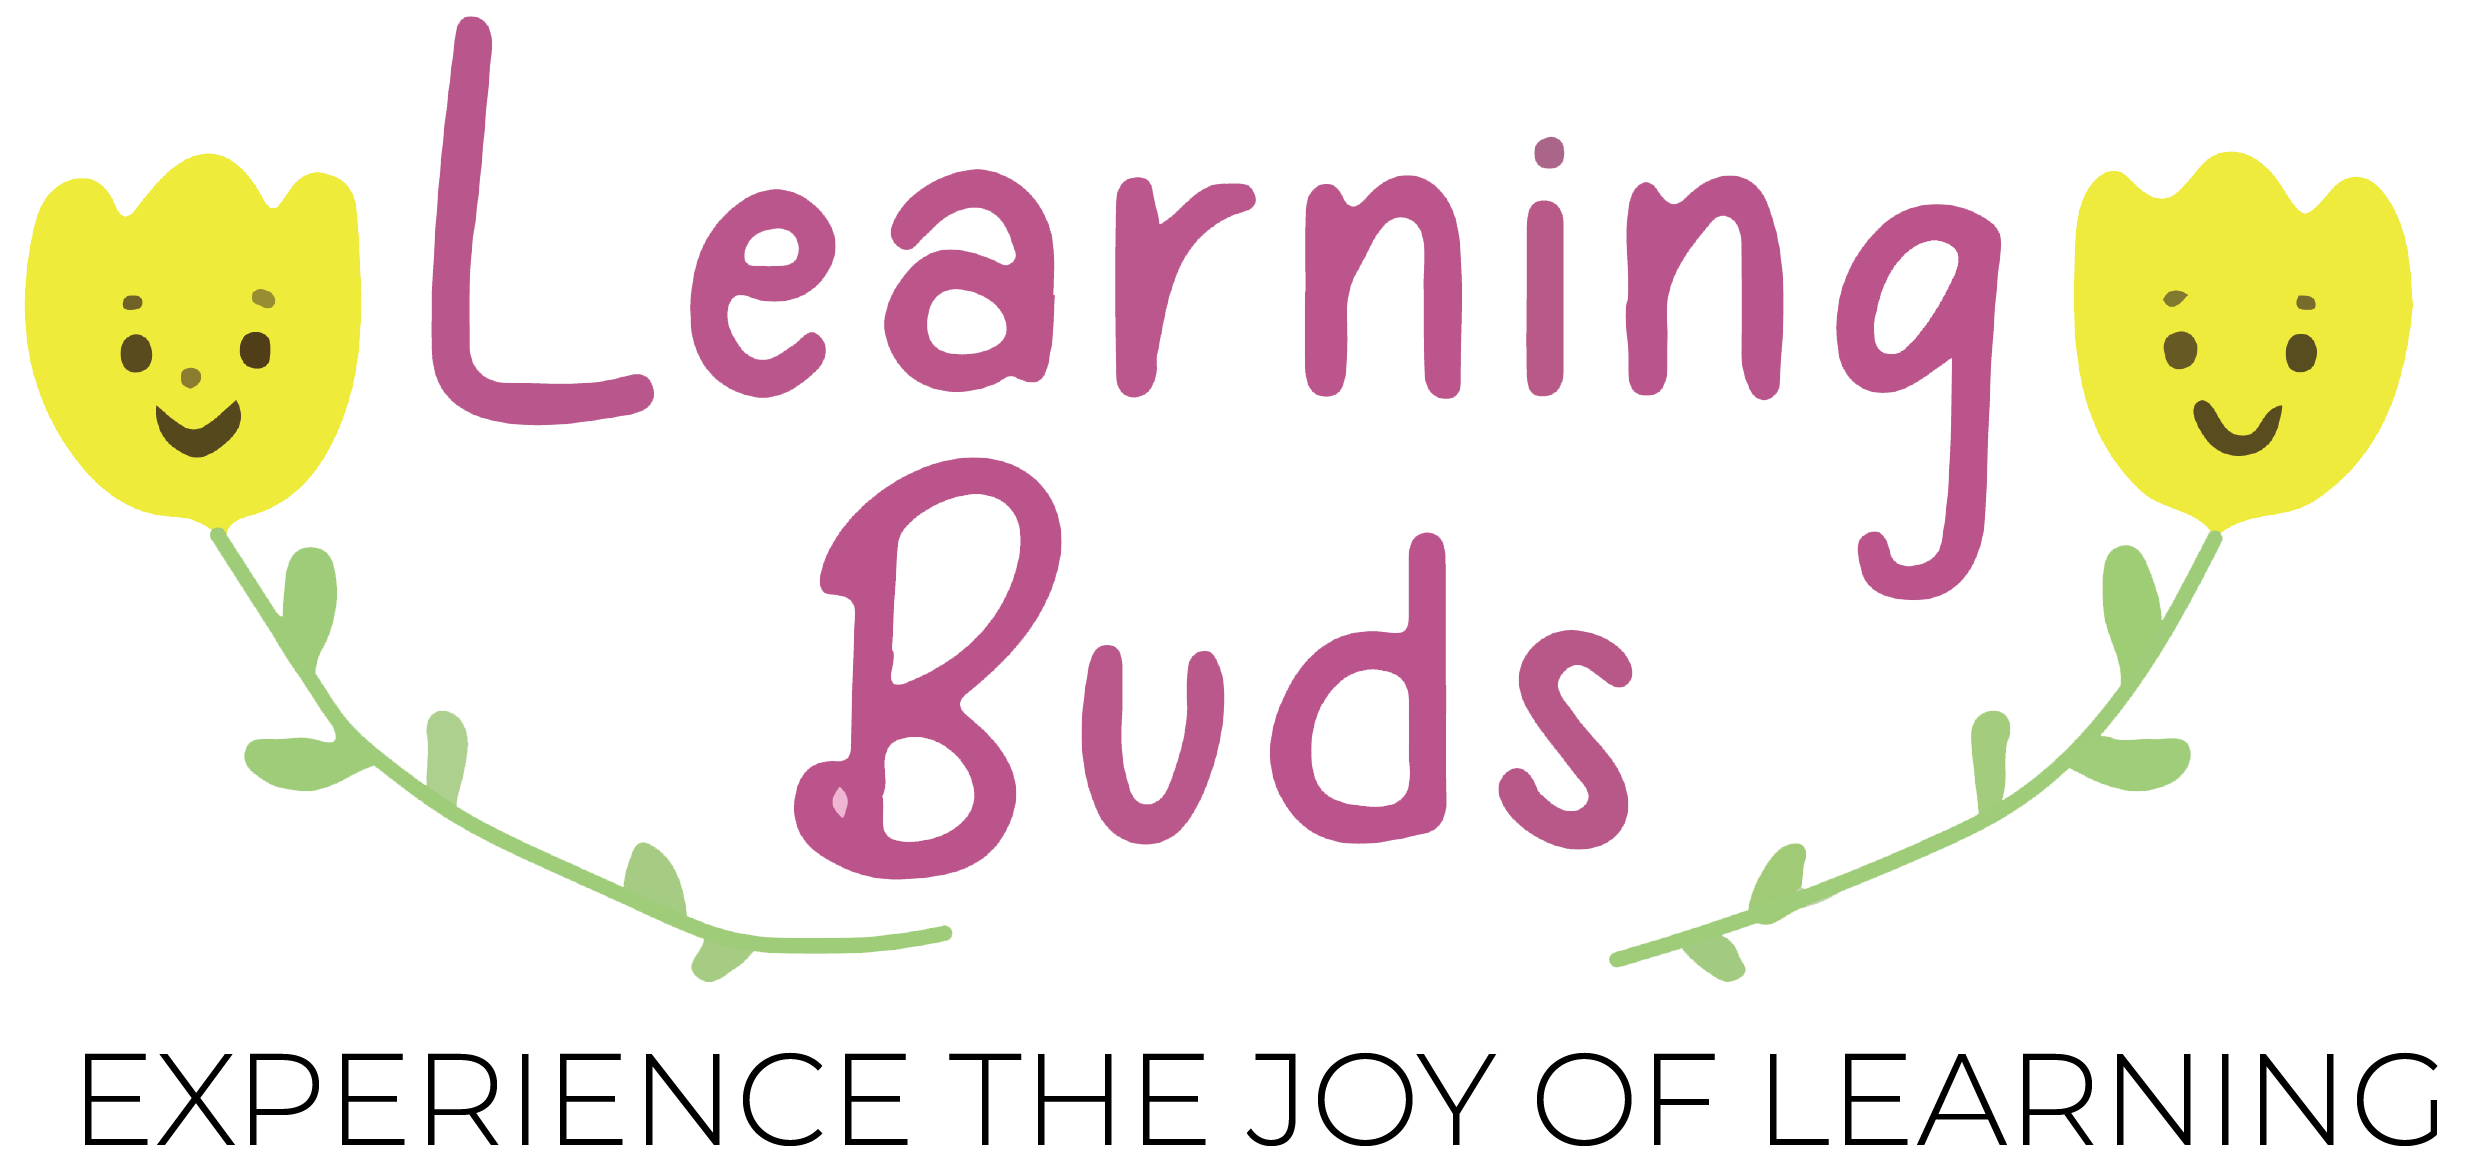 The Learning Buds